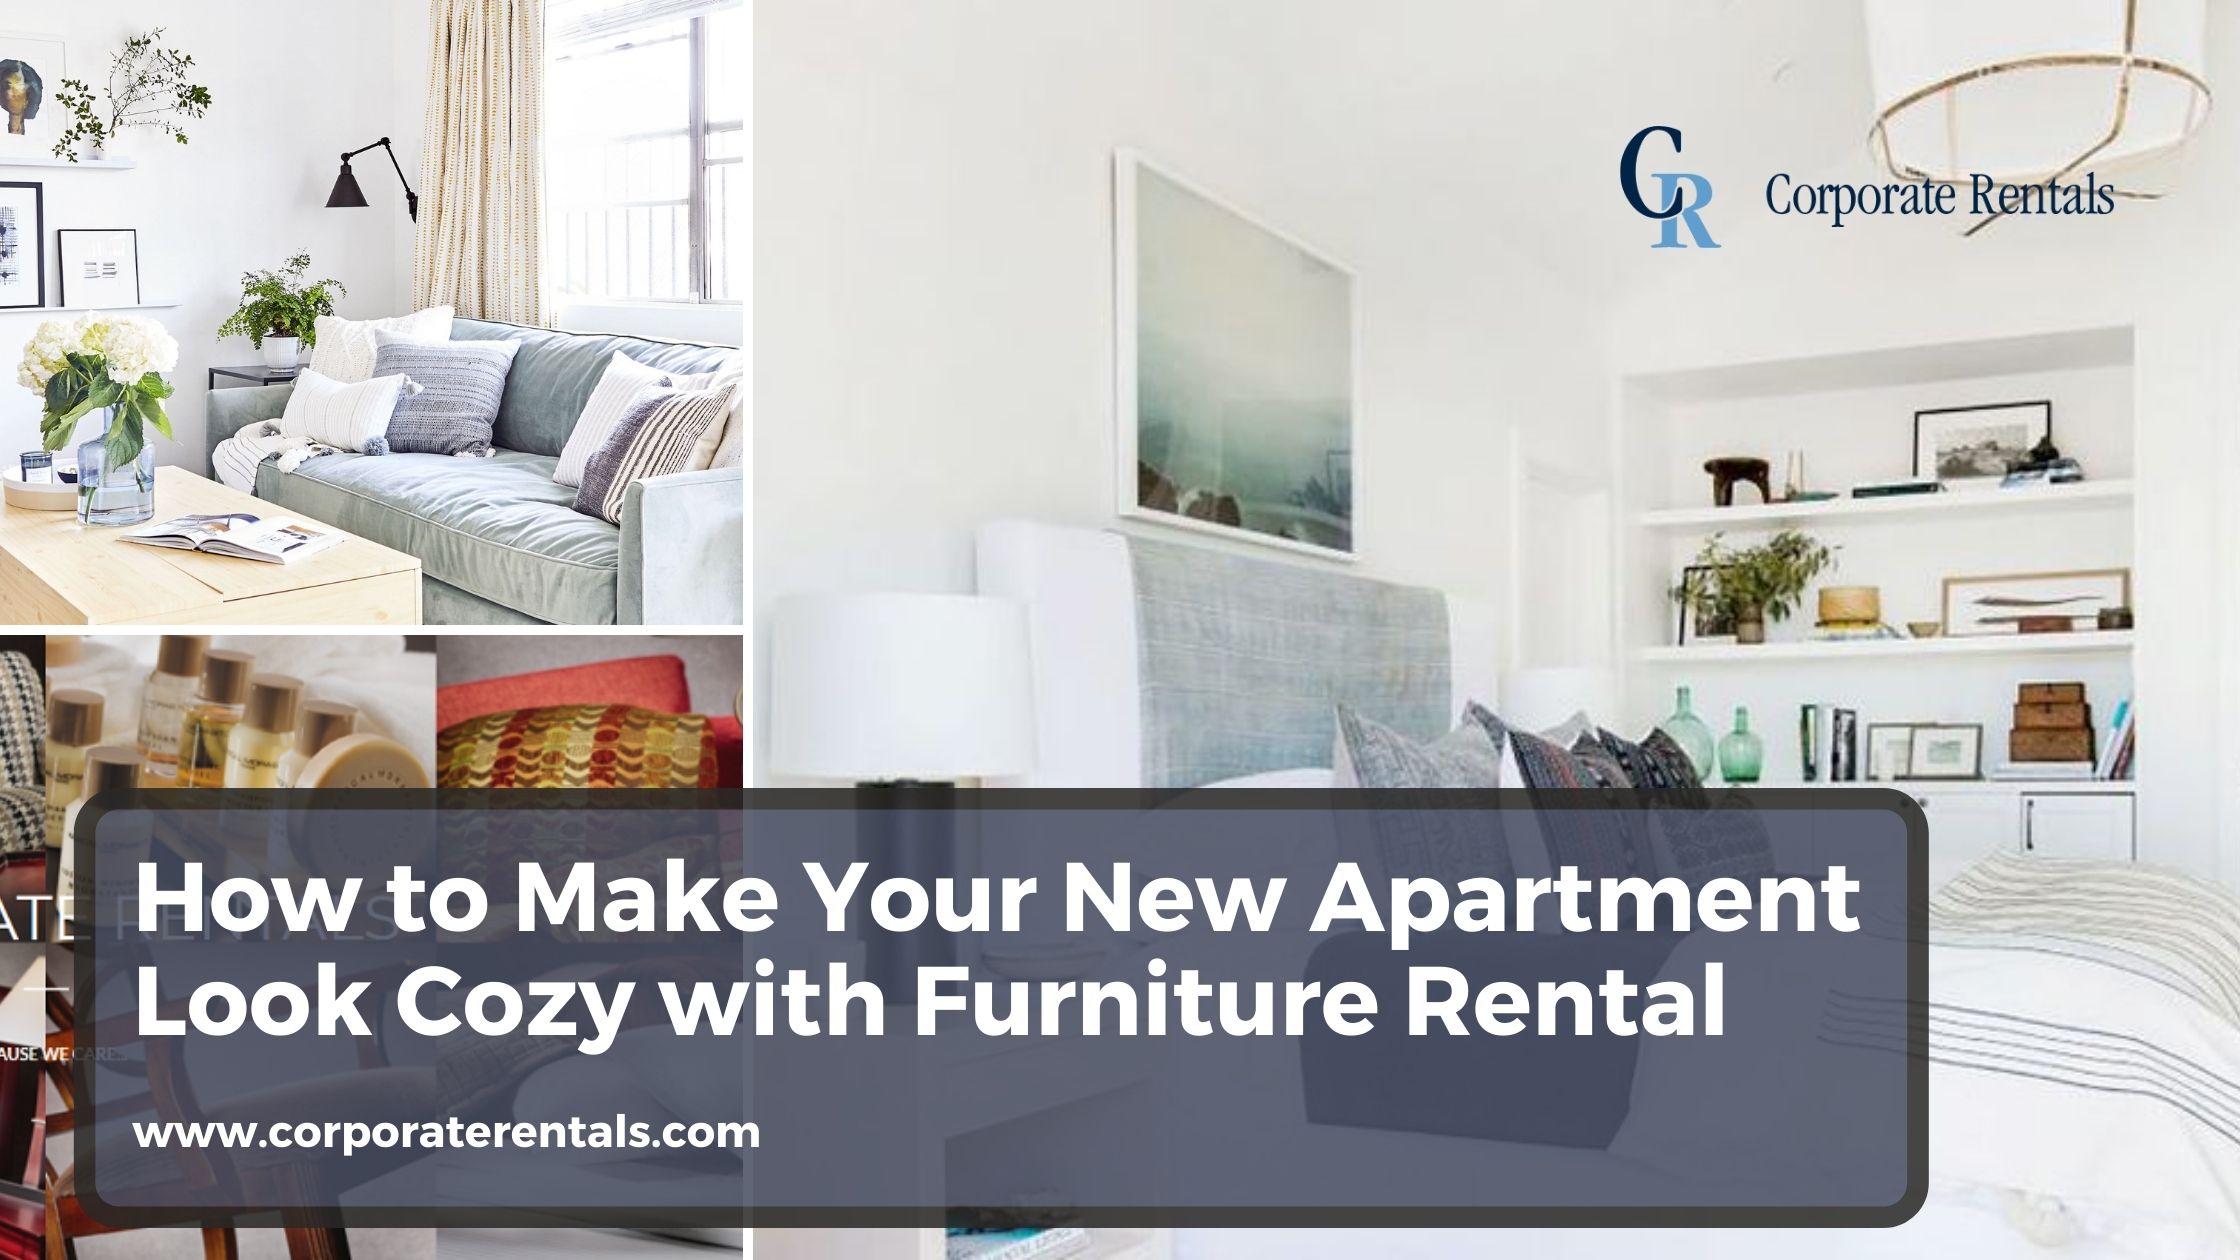 How to Make Your New Apartment Look Cozy with Furniture Rental